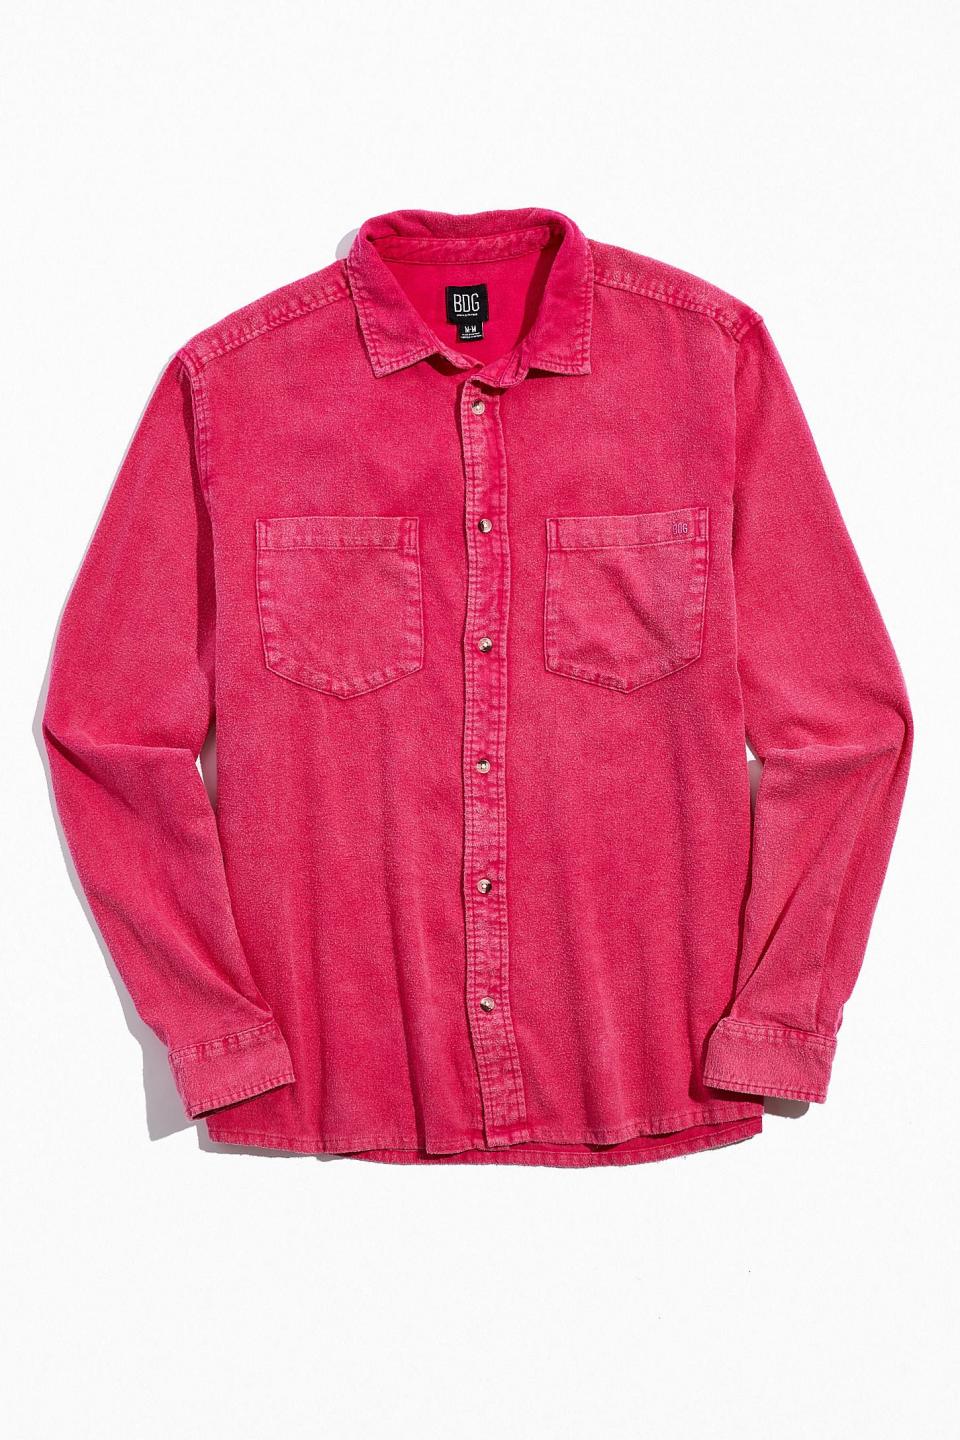 3) BDG Washed Flannel Long Sleeve Button-Down Shirt